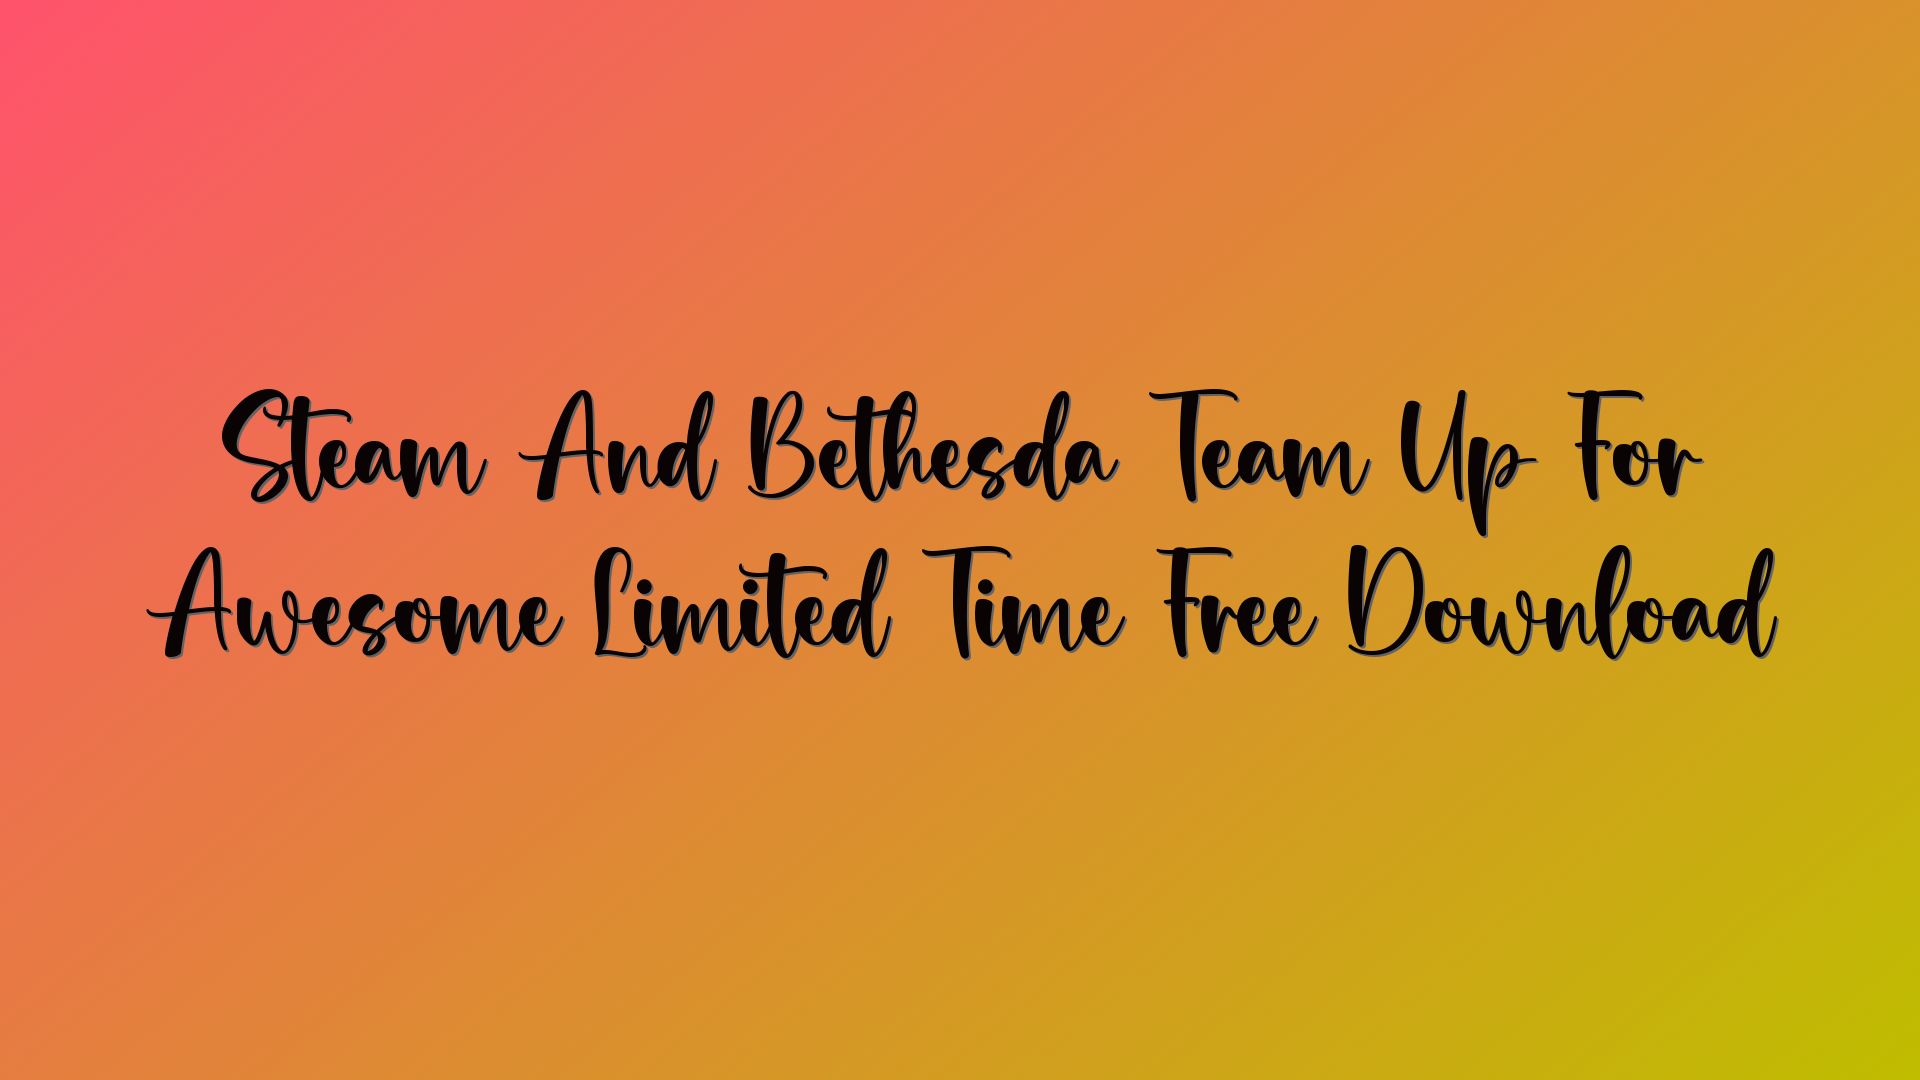 Steam And Bethesda Team Up For Awesome Limited Time Free Download